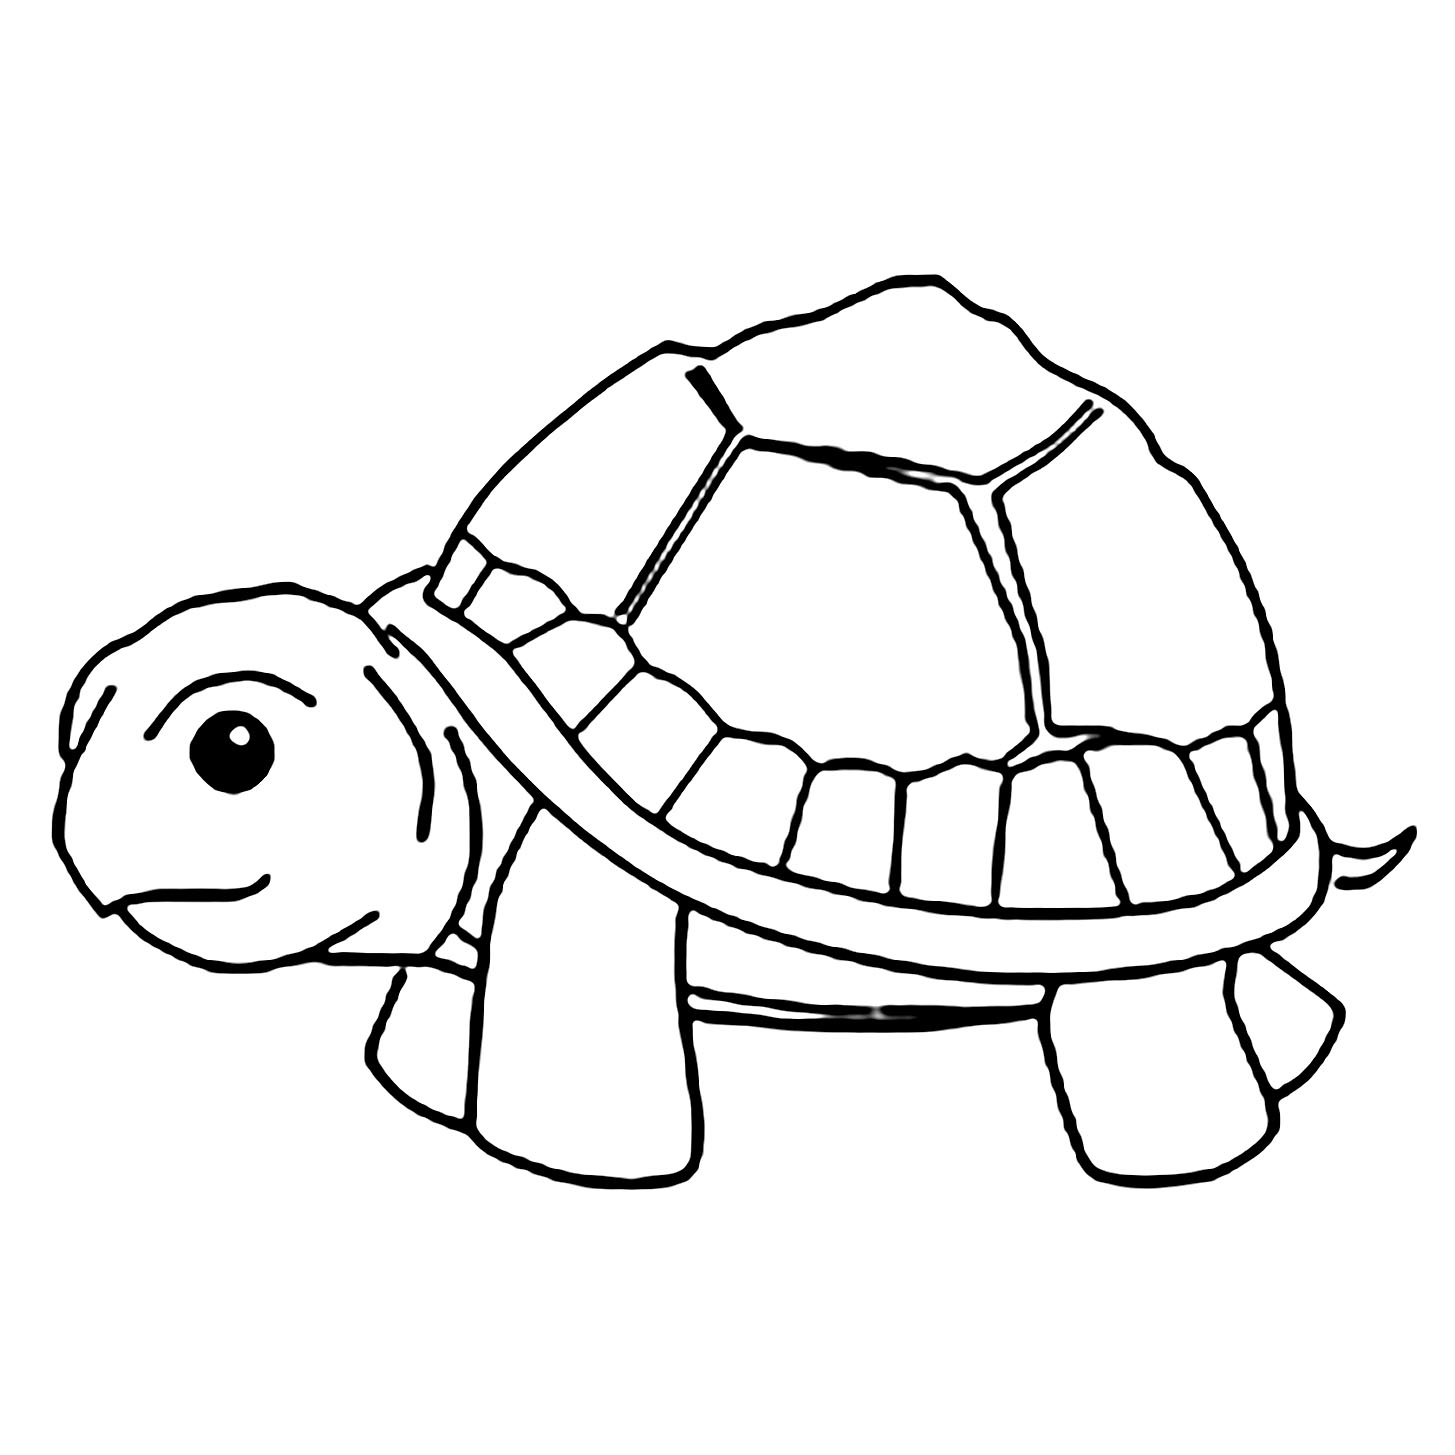 Turtle Coloring For Kids - Turtles Kids Coloring Pages